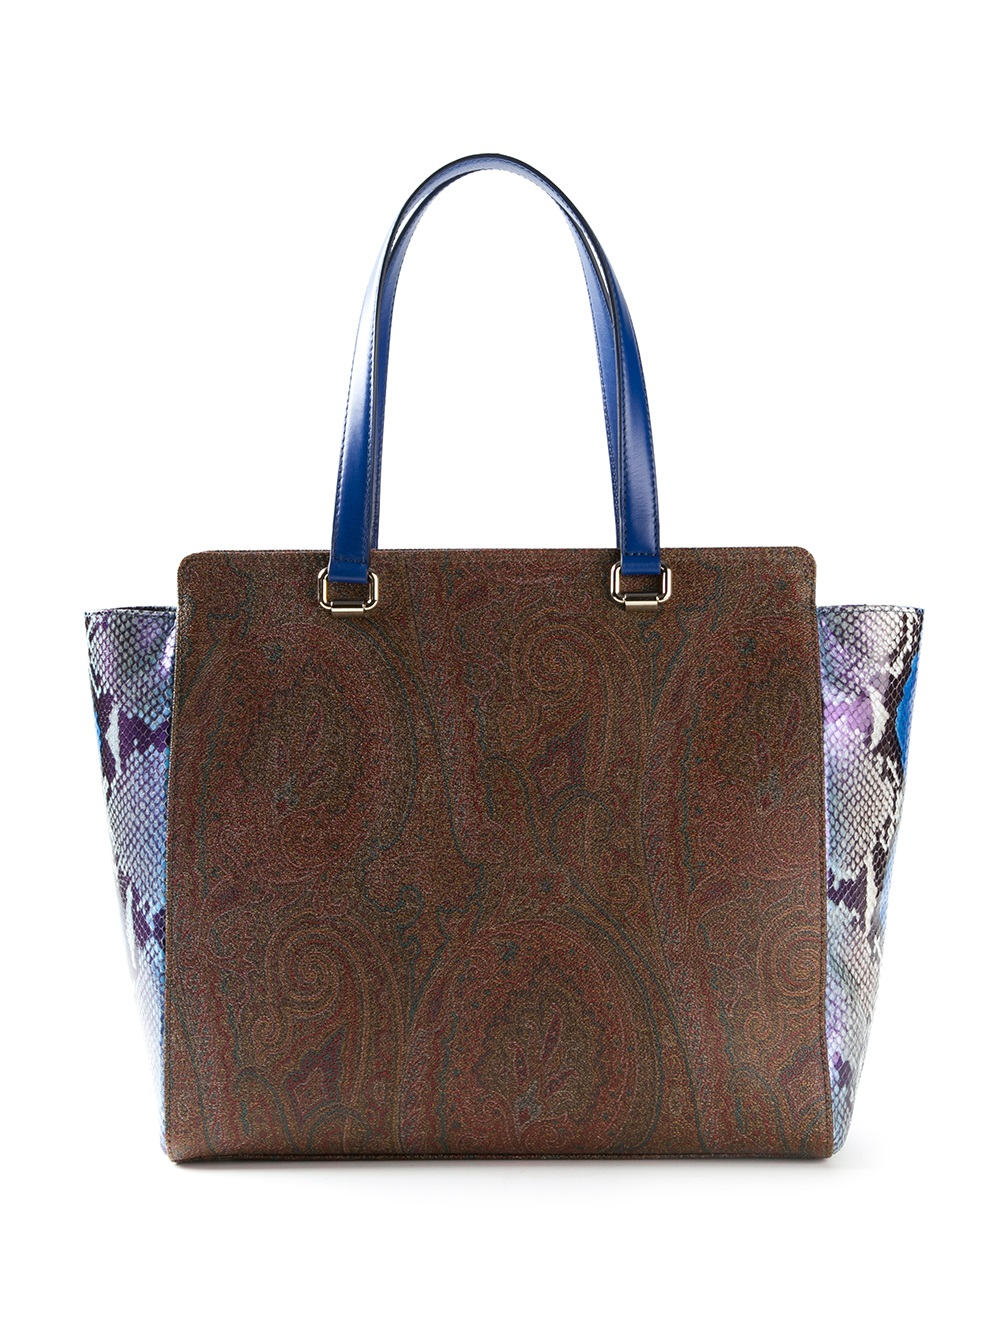 Lyst - Etro Paisley Print Tote in Brown